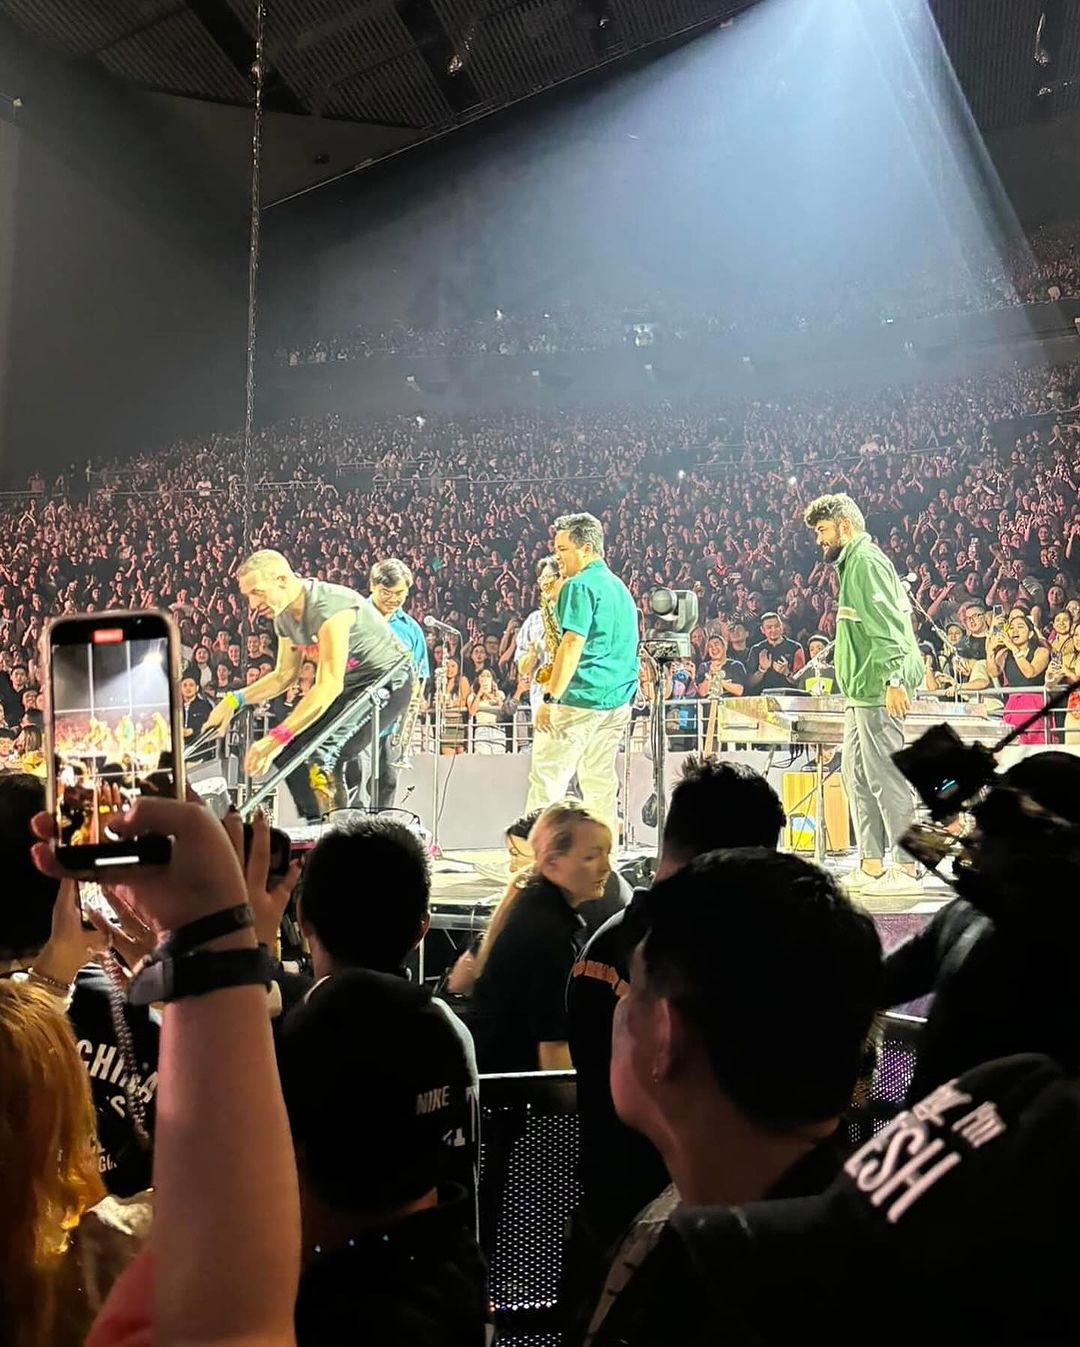 Coldplay's Chris Martin invited Filipino band Lola Amour onstage